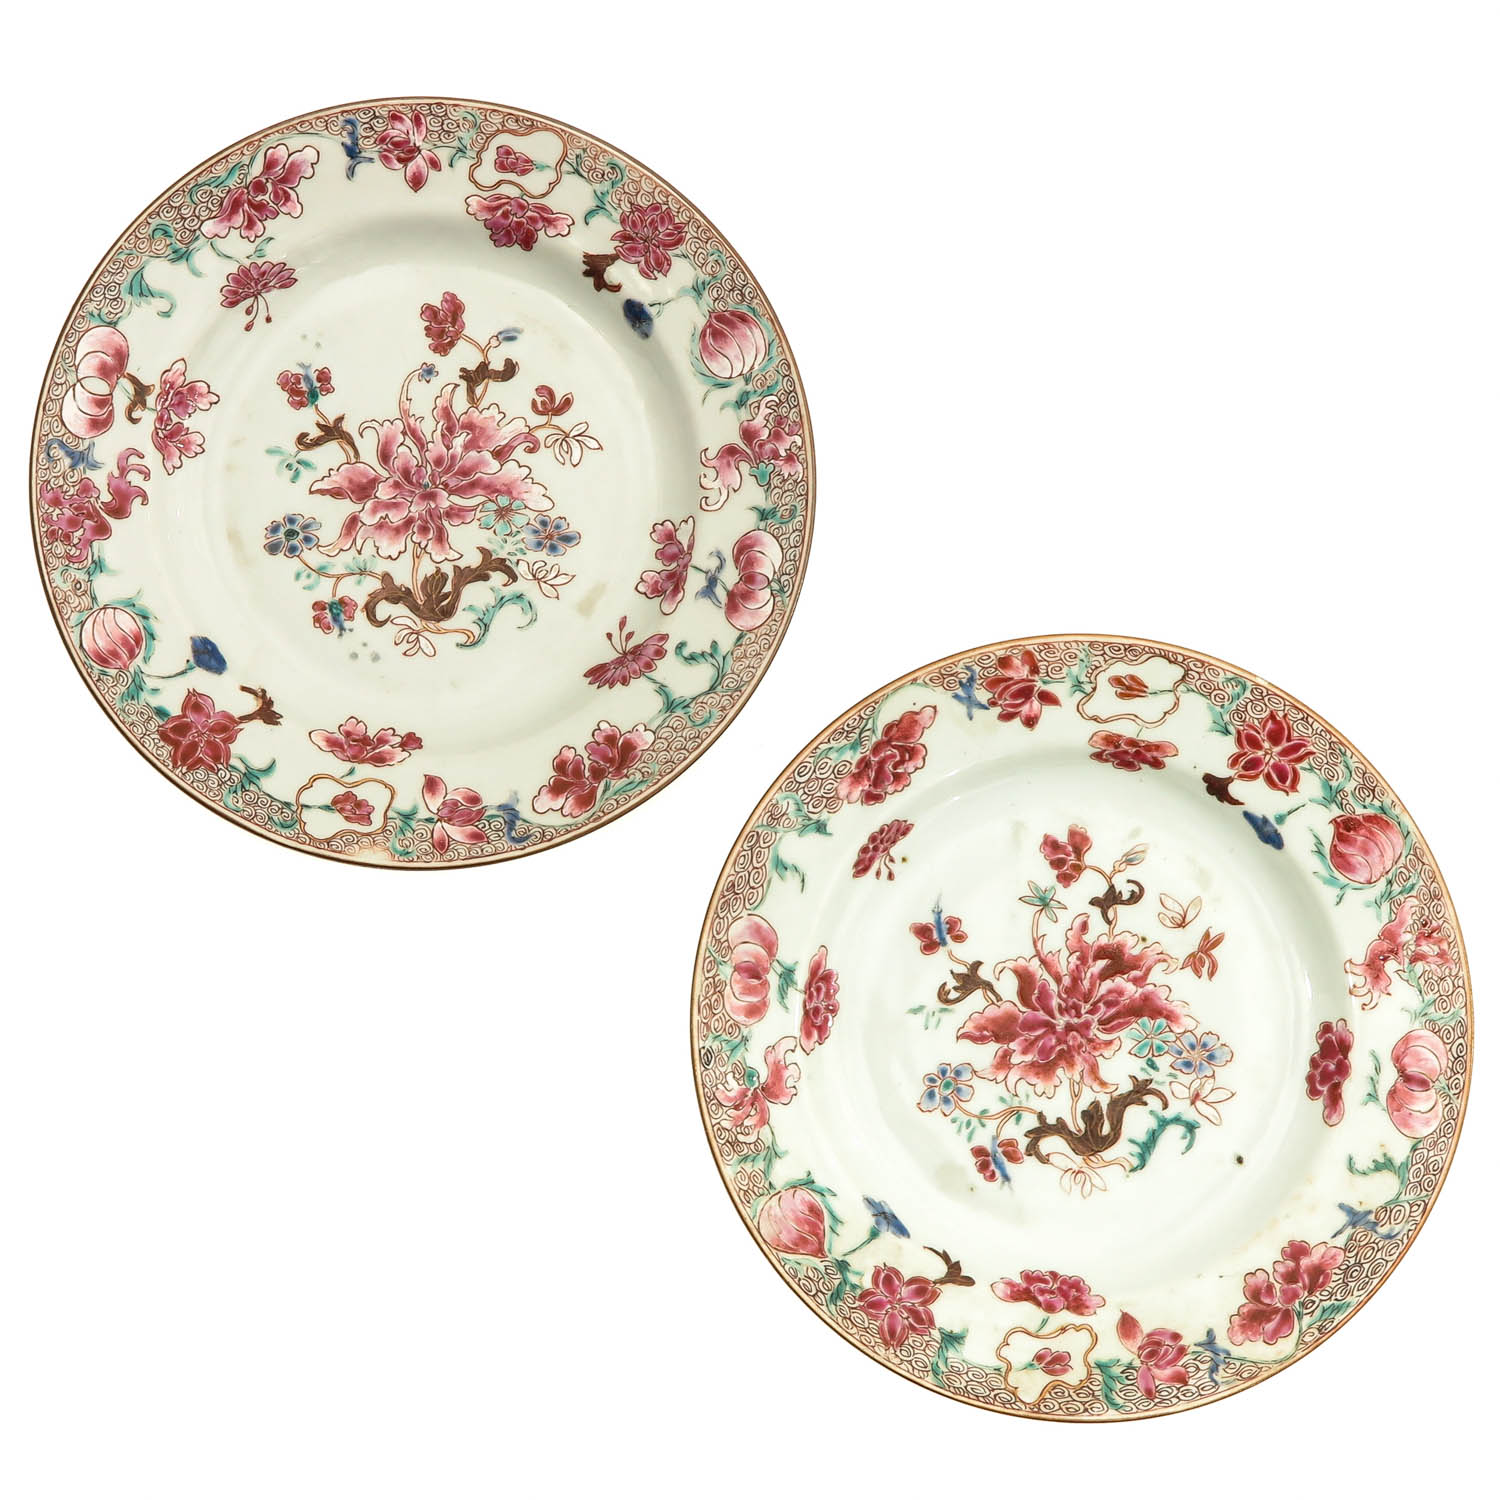 A Series of 4 Famille Rose Plates - Image 5 of 9